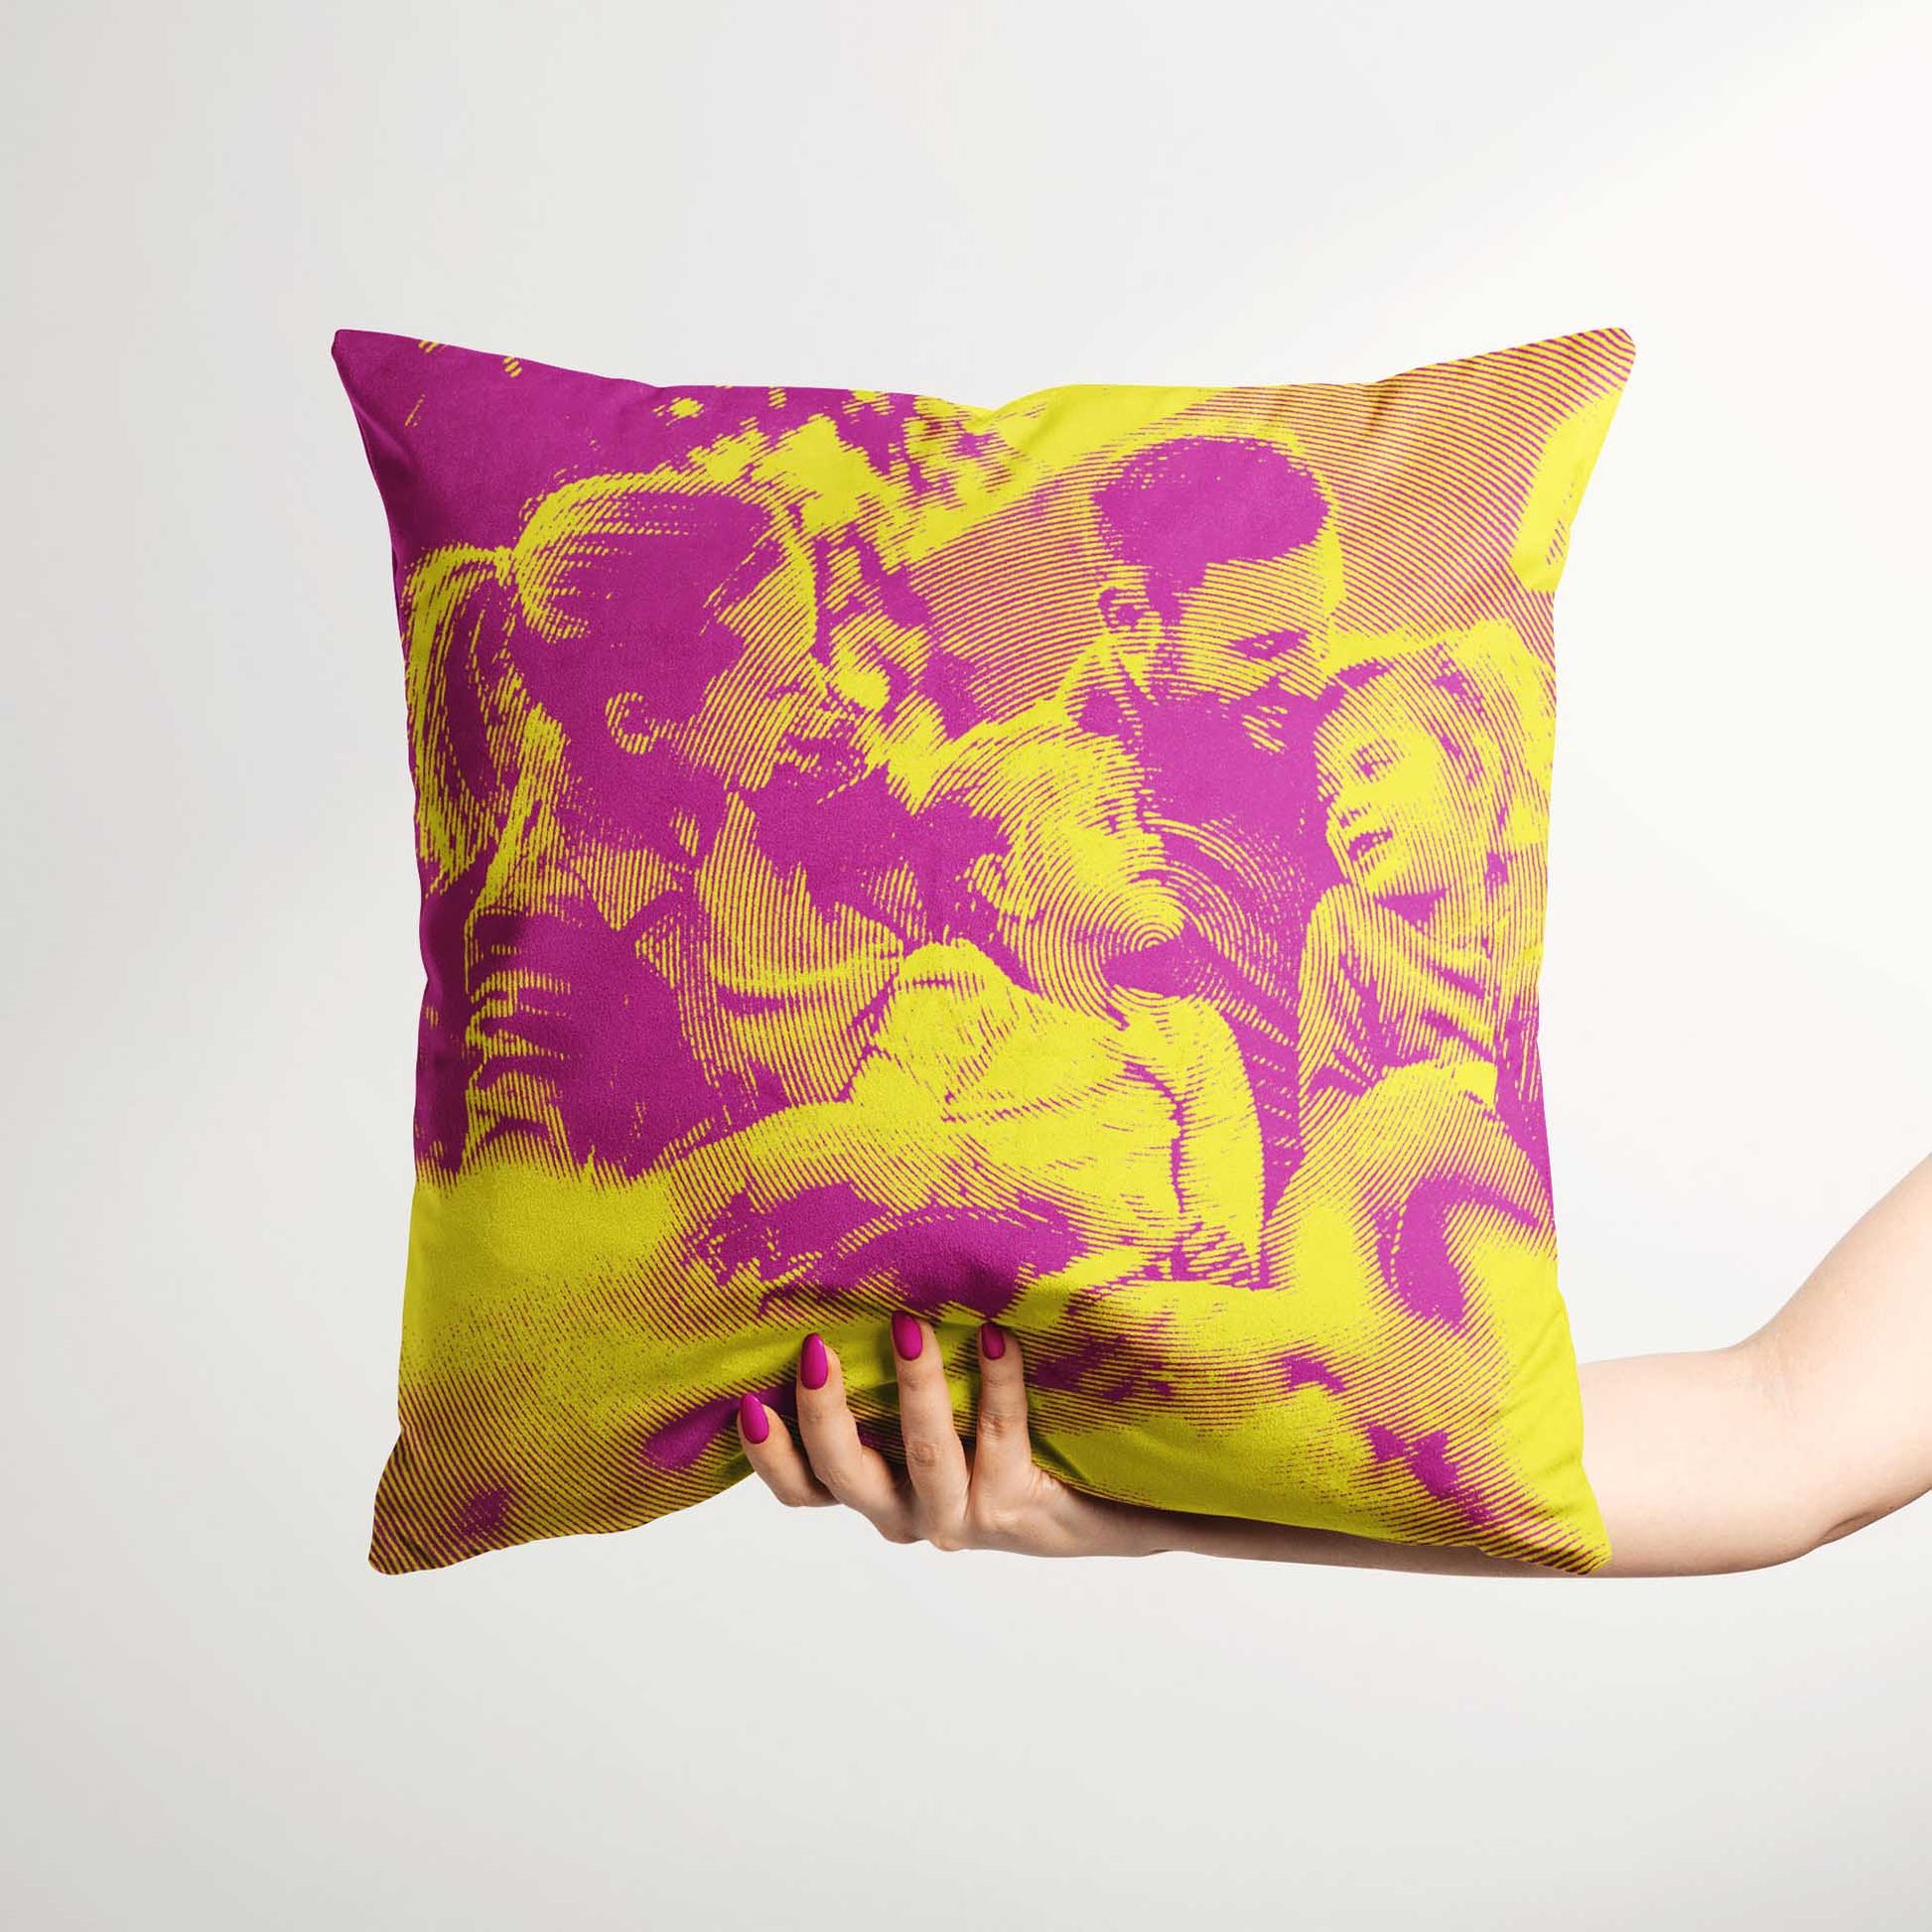 Brighten up your space with a Personalised Yellow & Pink Texture Cushion. Its soft velvet fabric and cozy filling provide a comfortable and relaxing spot to unwind. Custom printed from your photo, this cushion adds unique touch